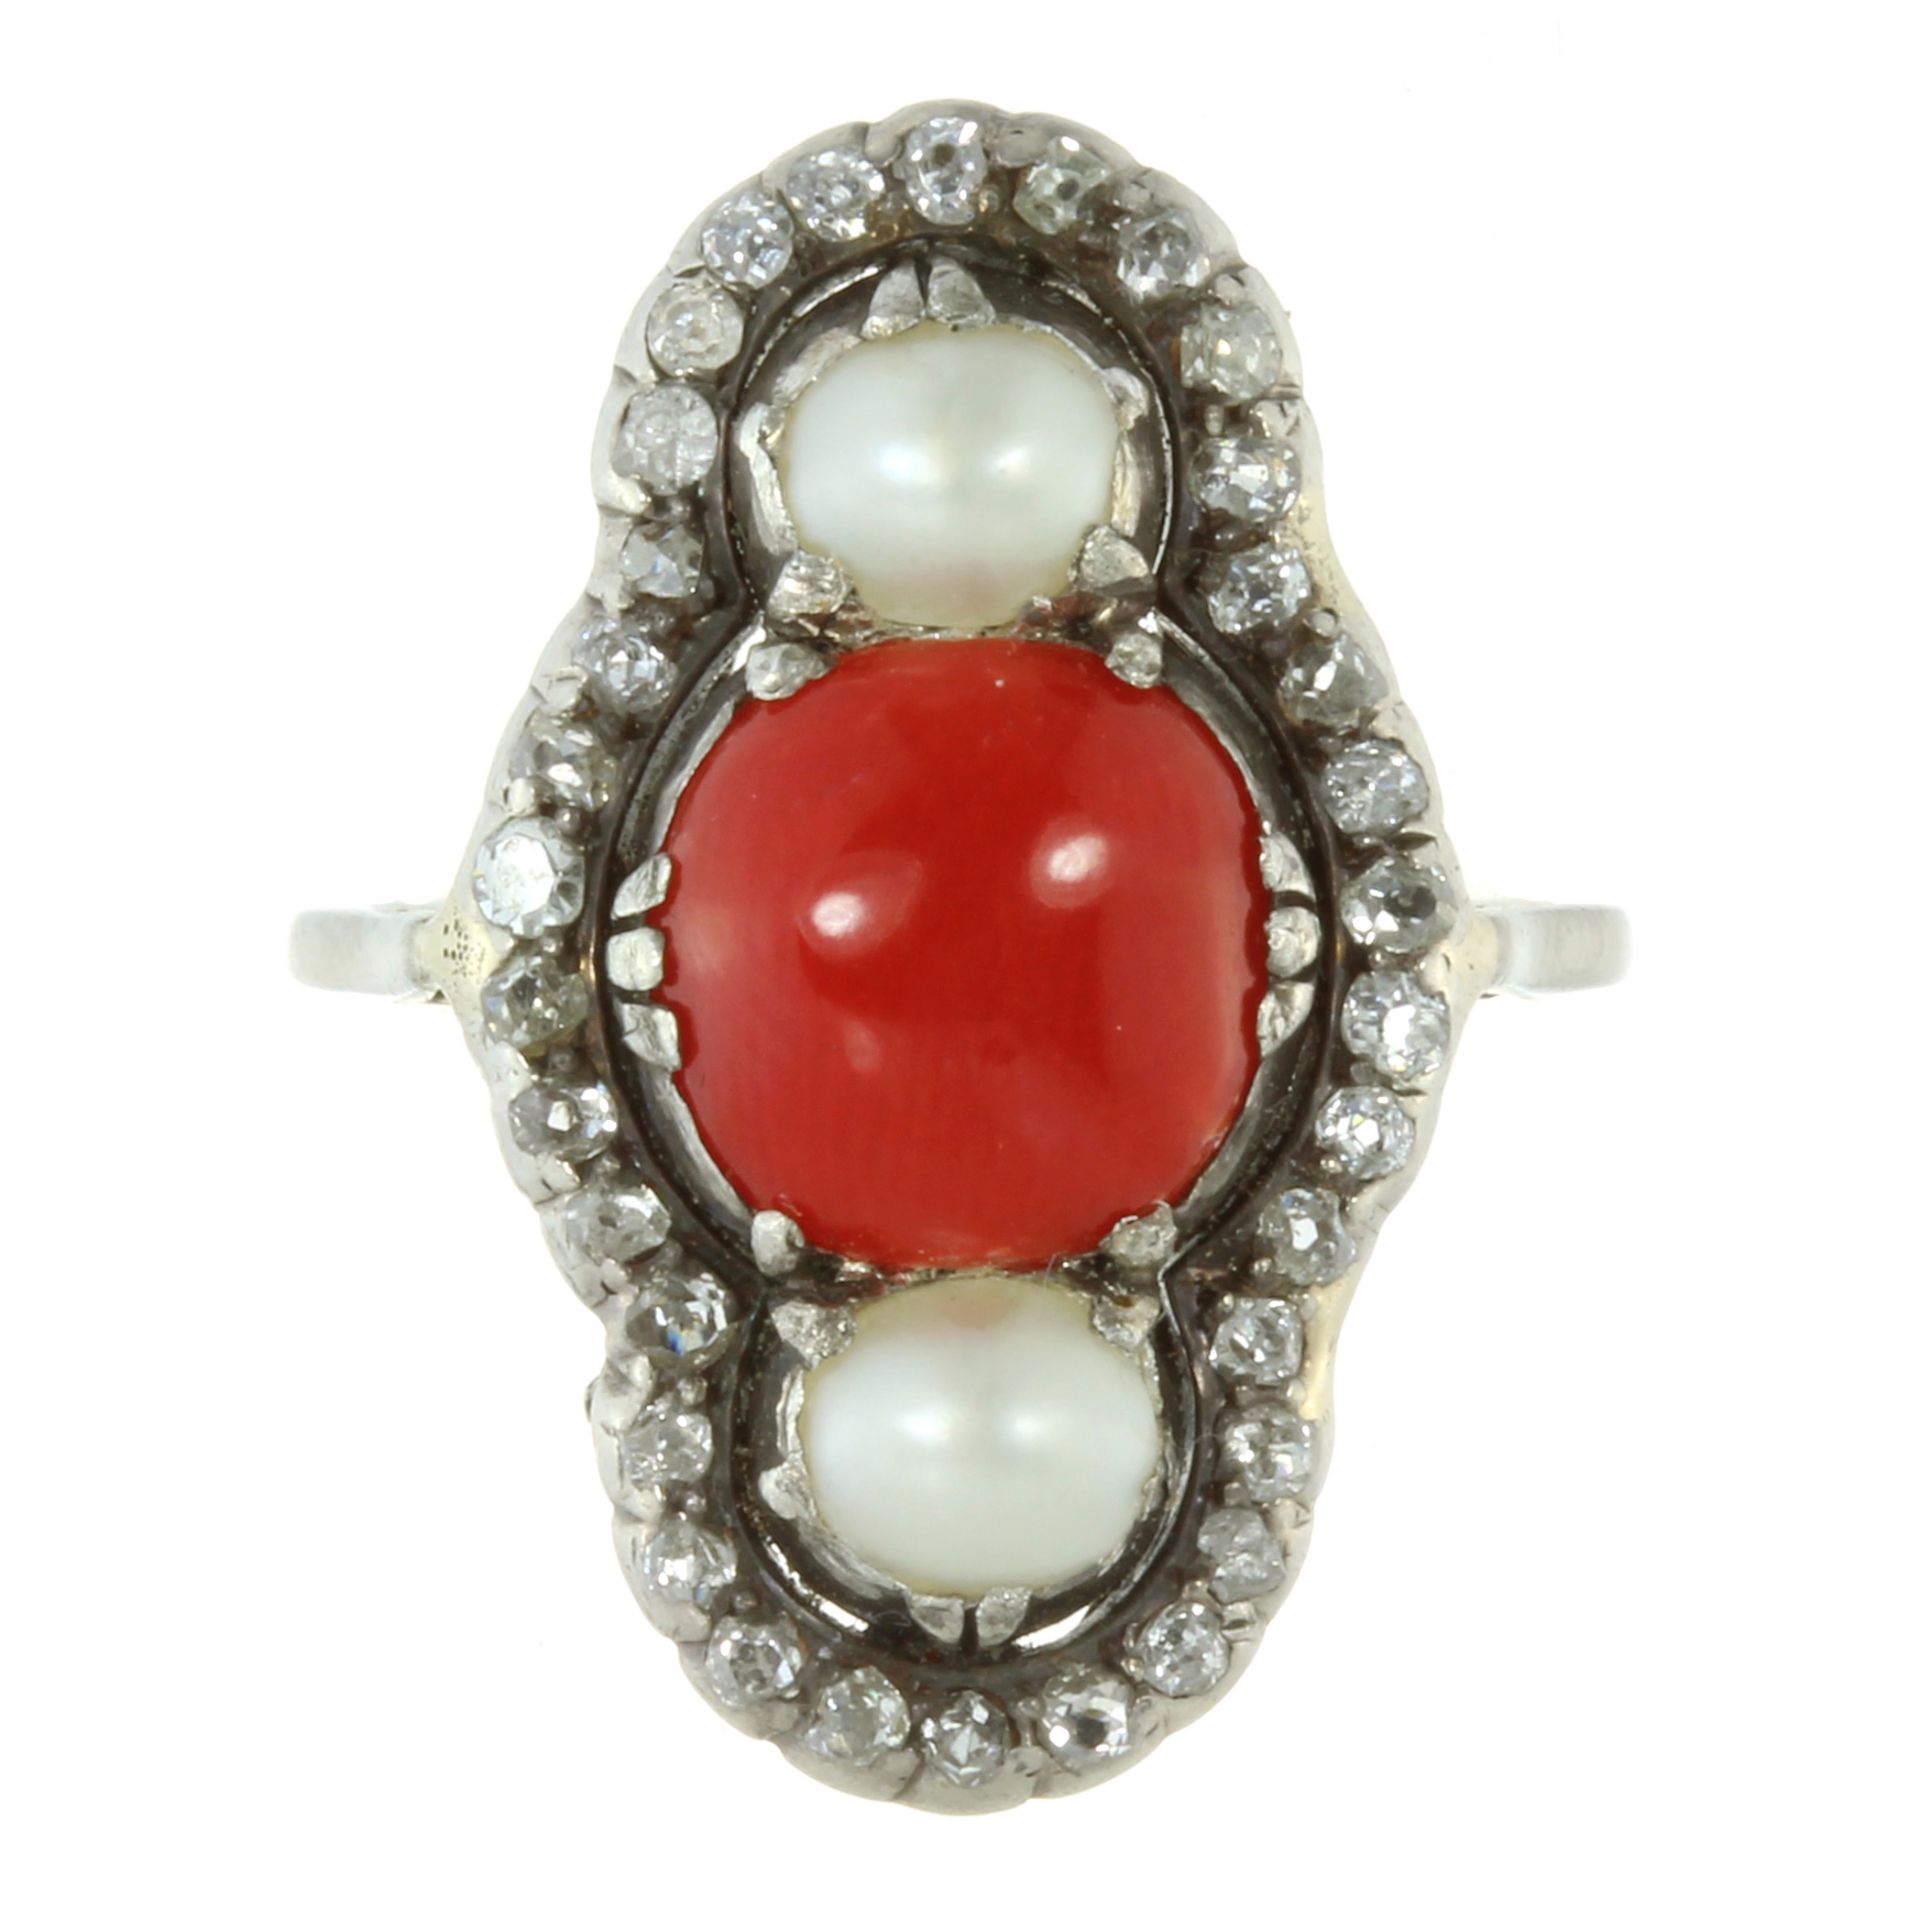 AN ANTIQUE CORAL, NATURAL PEARL AND DIAMOND RING in white gold or platinum, the elongated face set